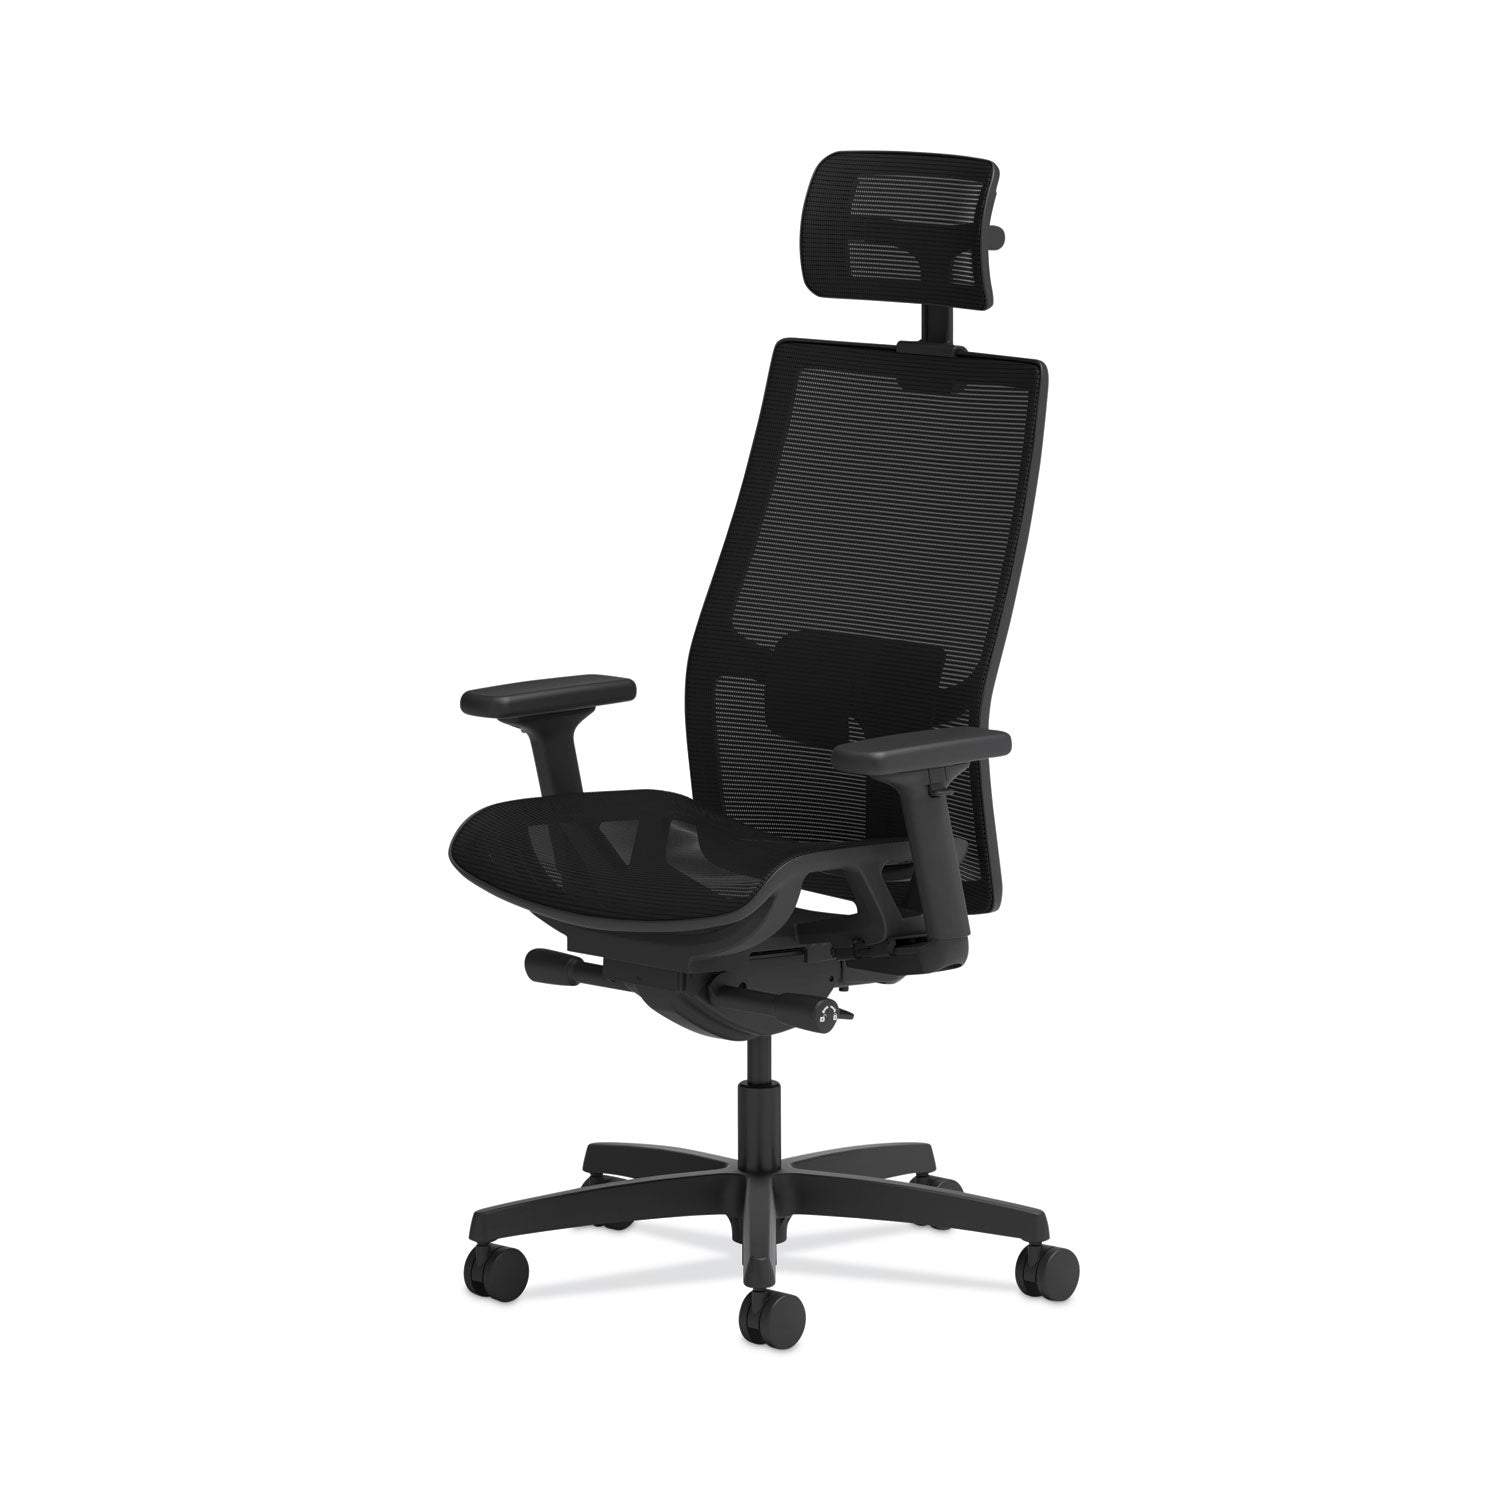 ignition-20-4-way-stretch-mesh-back-and-seat-task-chair-supports-up-to-300-lb-17-to-21-seat-black-seat-black-base_honi2msky2imthr - 2